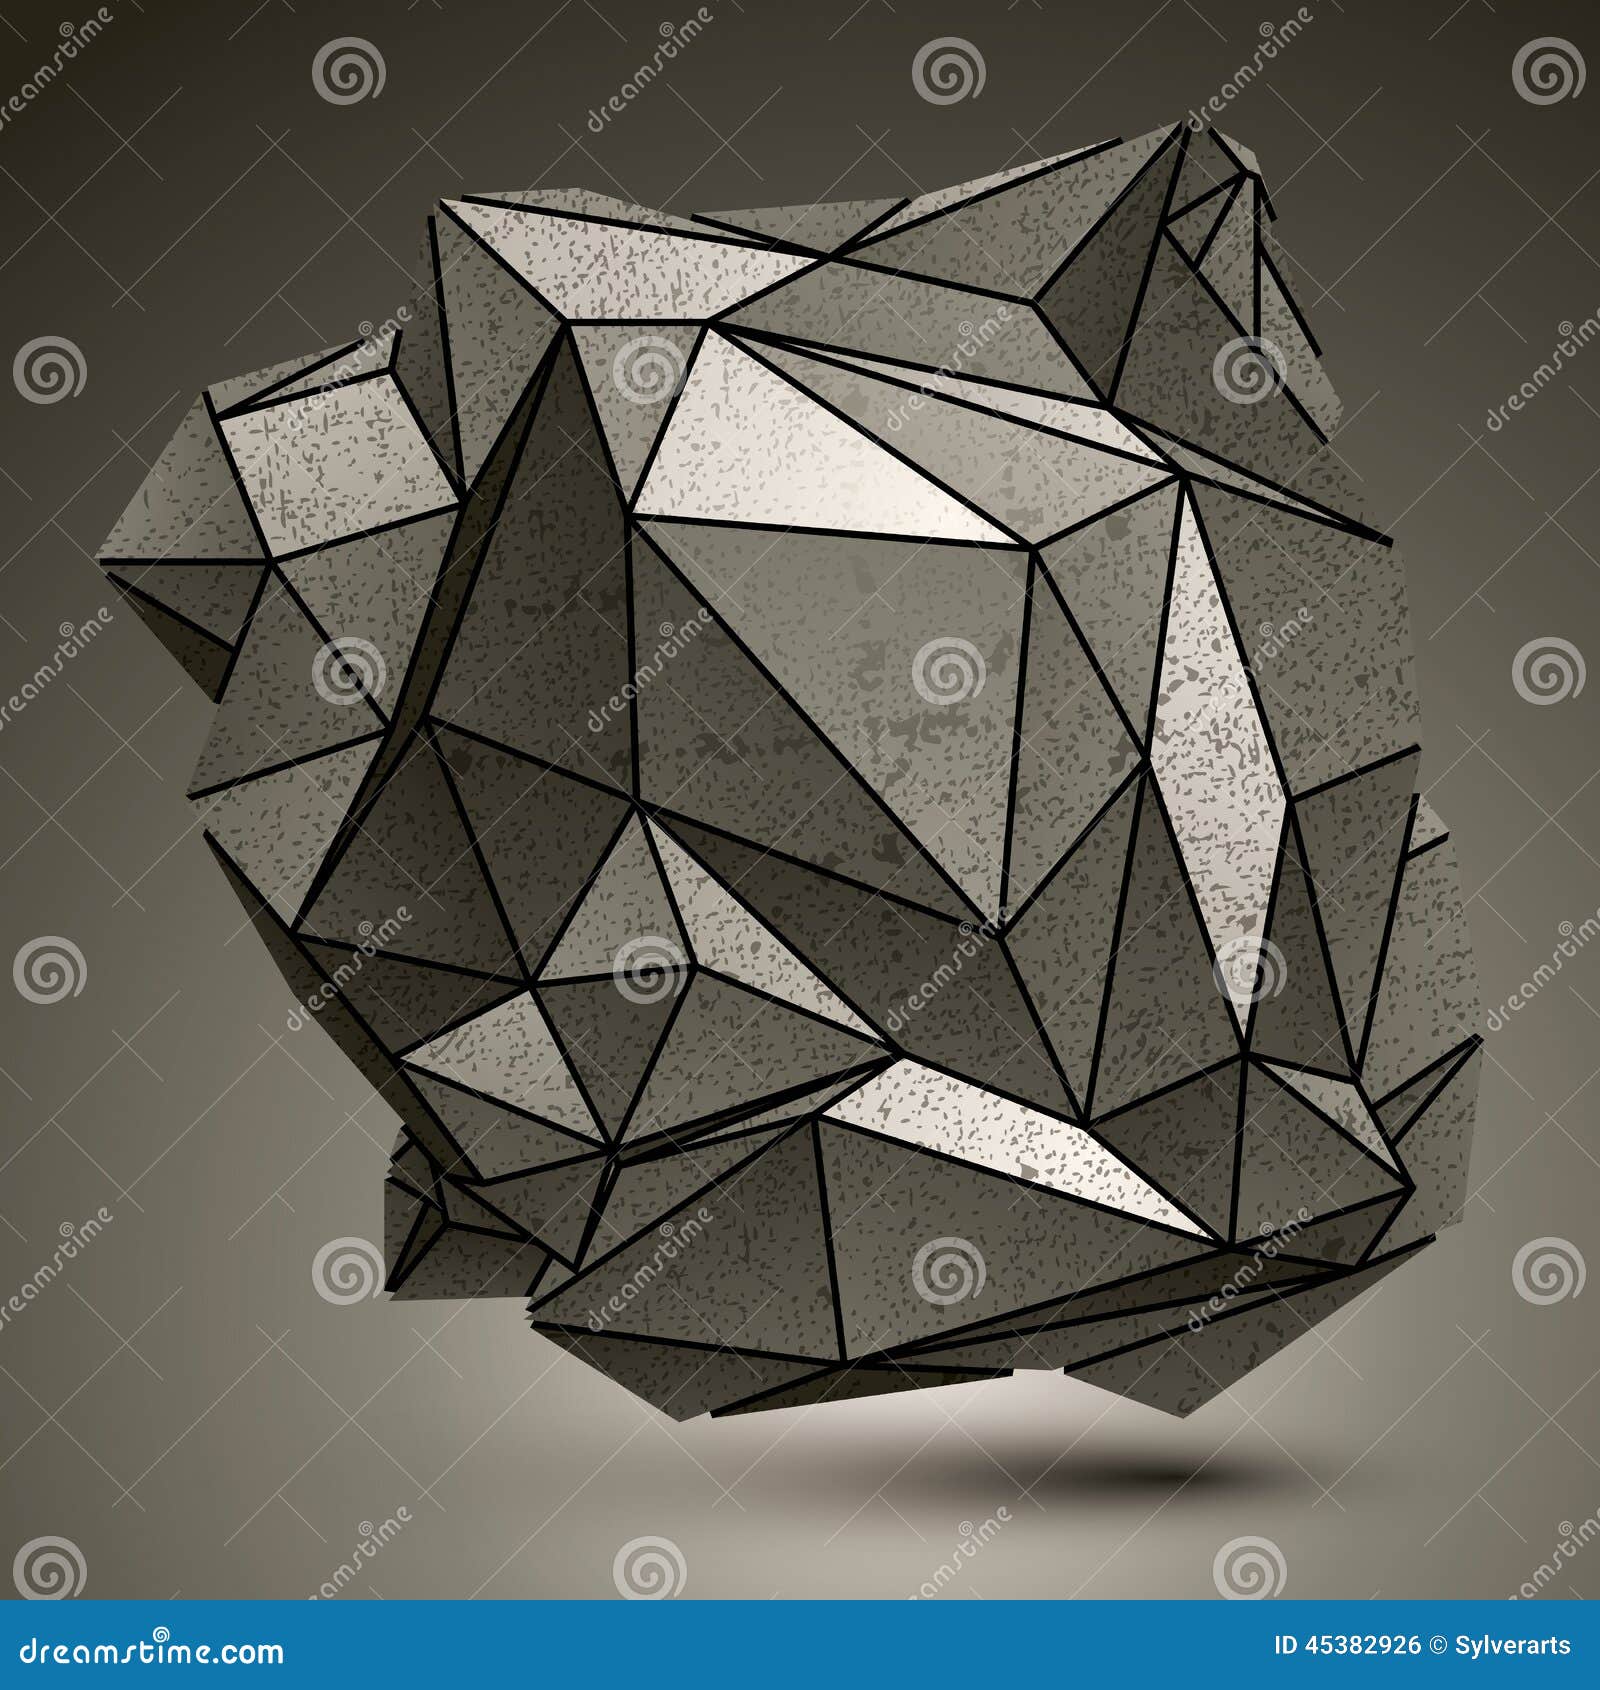 Deformed Complicated Metallic 3d Abstract Object Stock Vector Illustration Of Grayscale